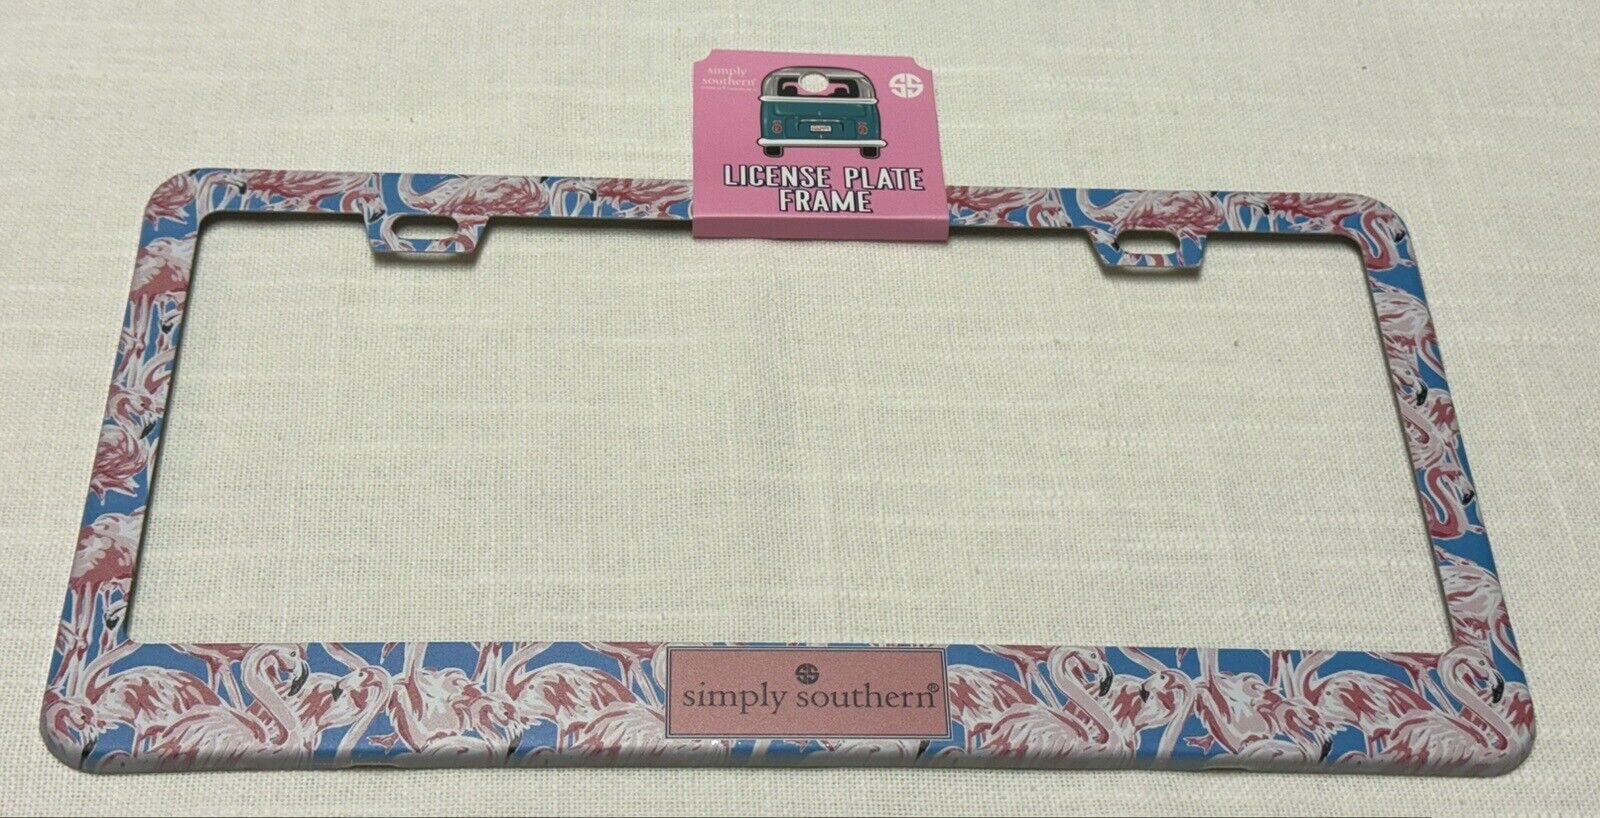 Simply Southern License Plate Frame NWT